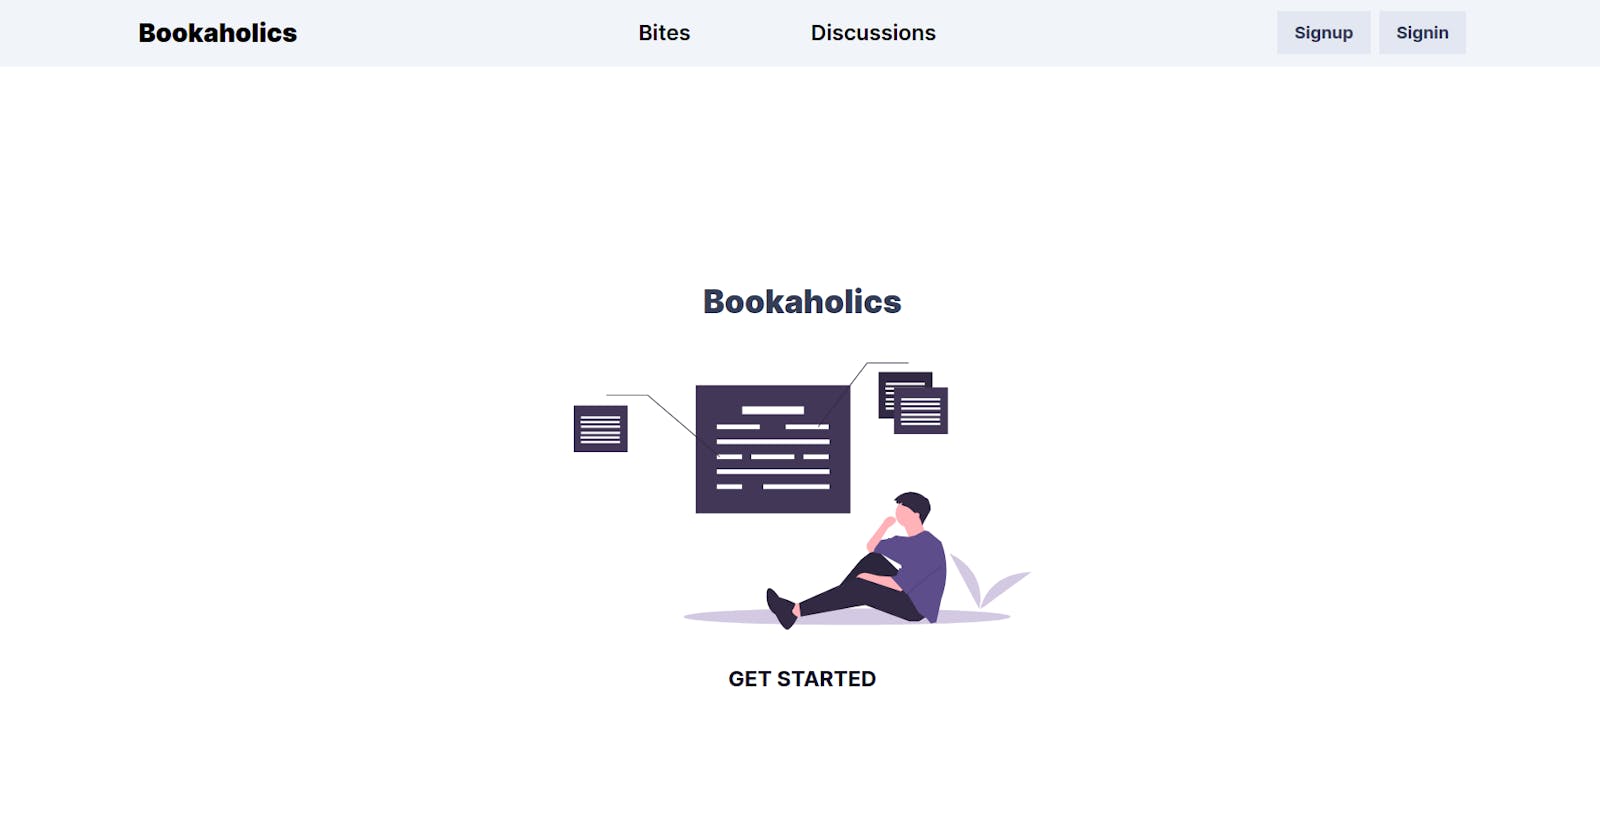 ✨ Introducing Bookaholics, a community platform for book lovers.